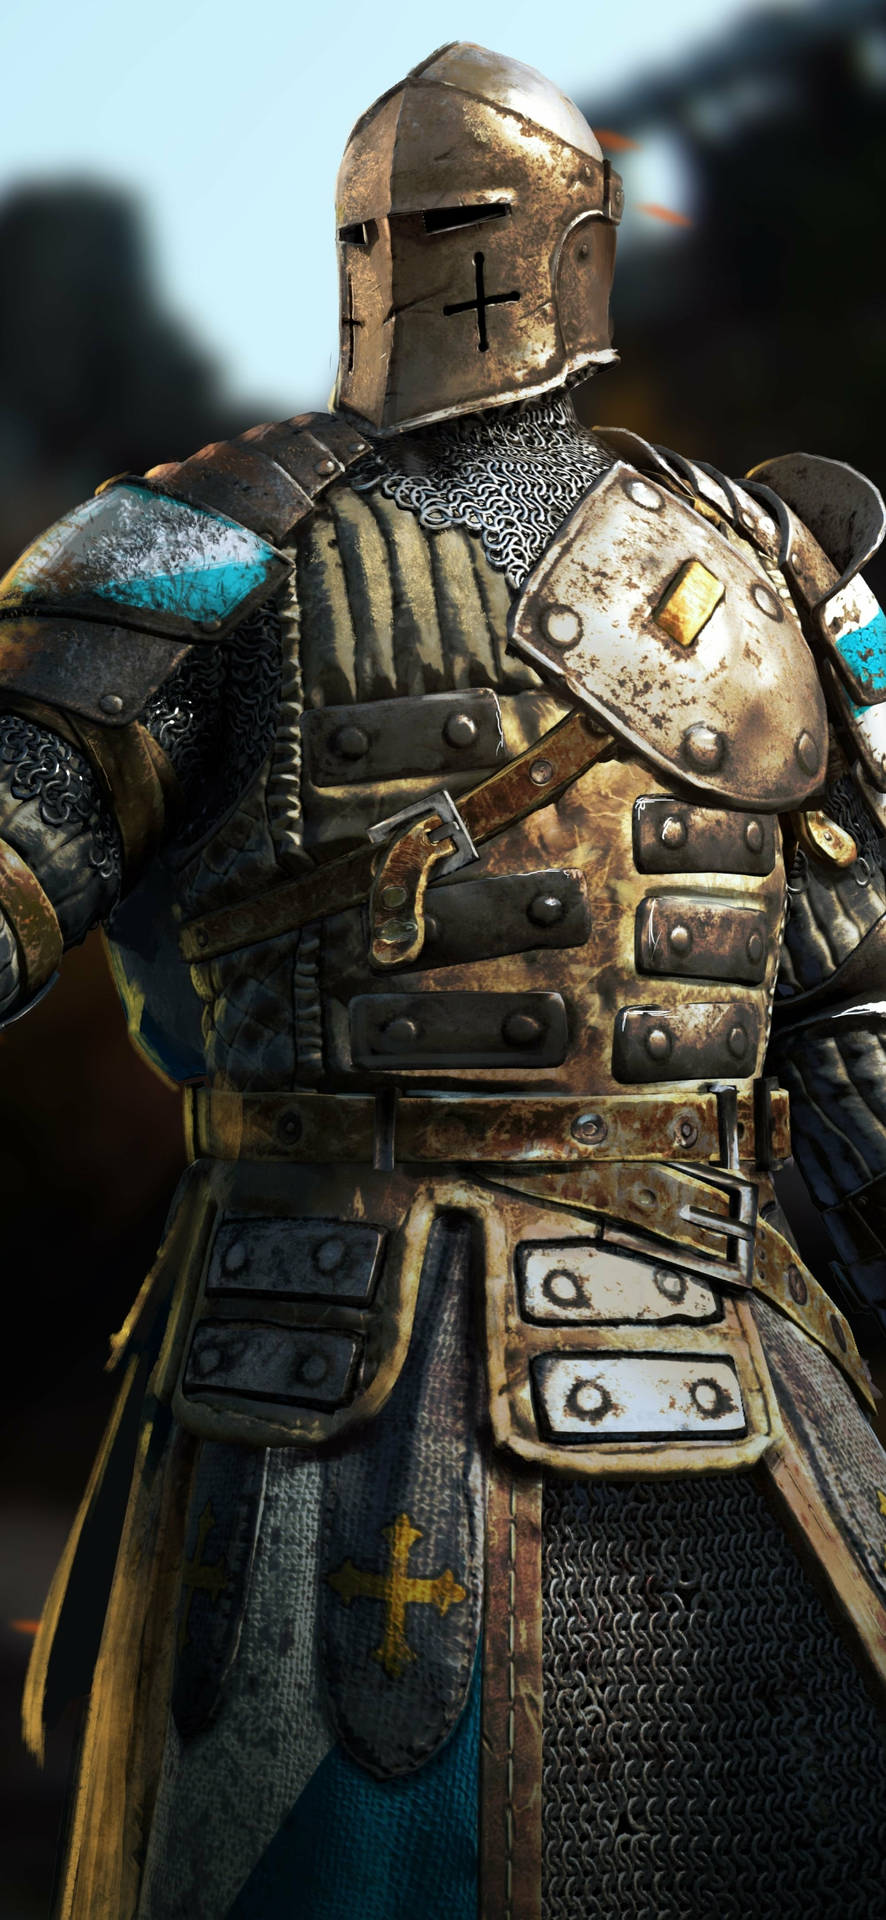 4k Gaming Phone For Honor Warden